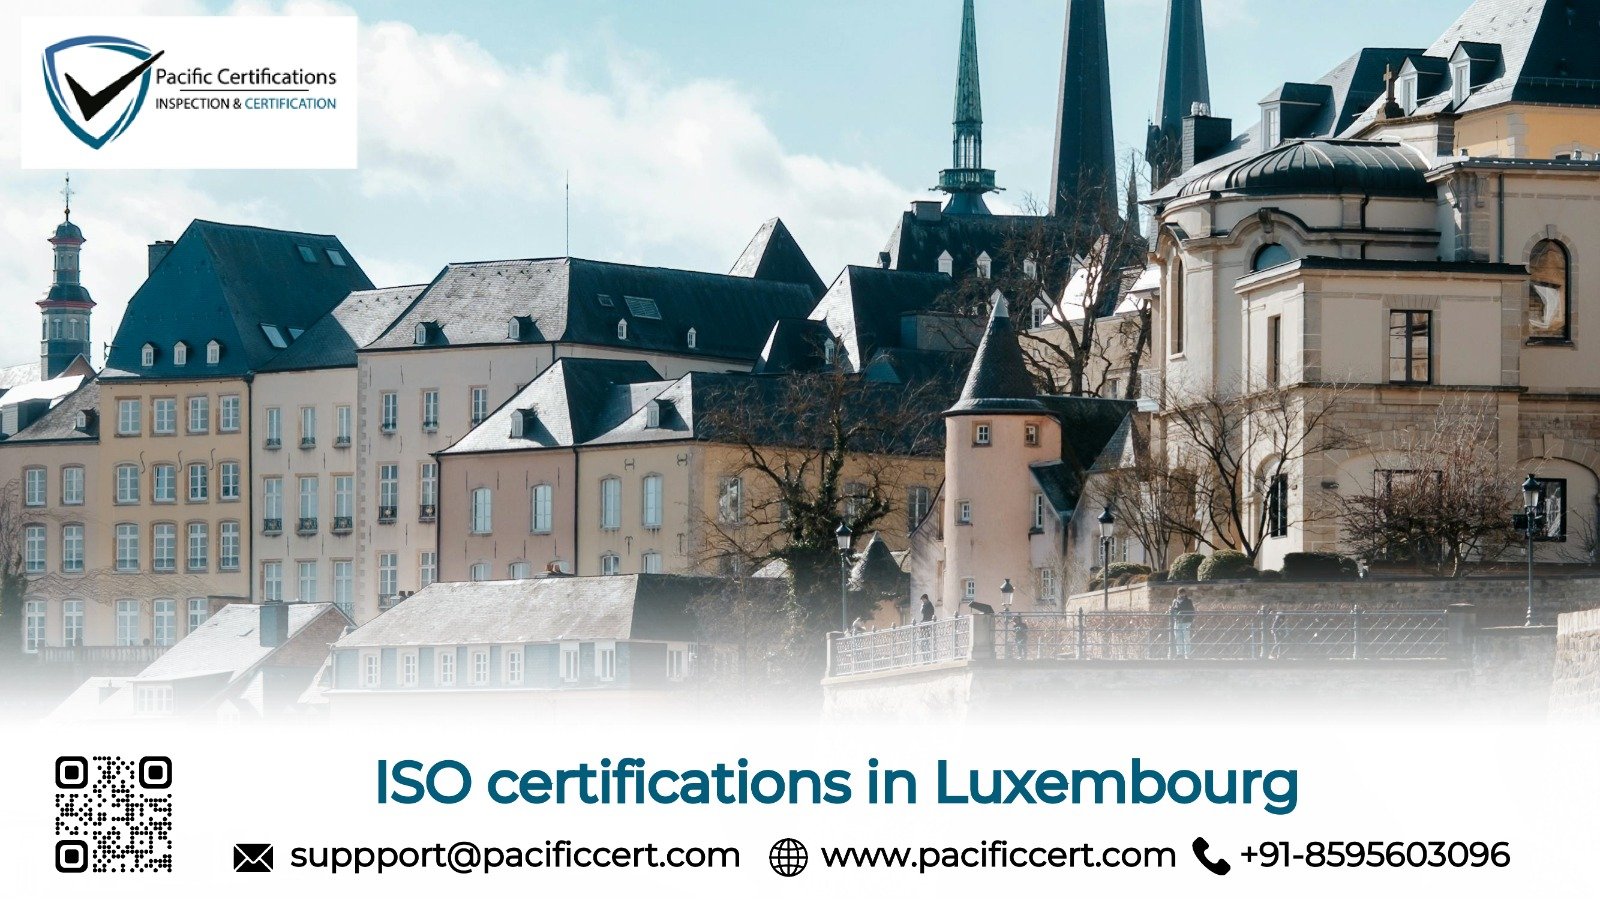 ISO Certifications in Luxembourg and How Pacific Certifications can help